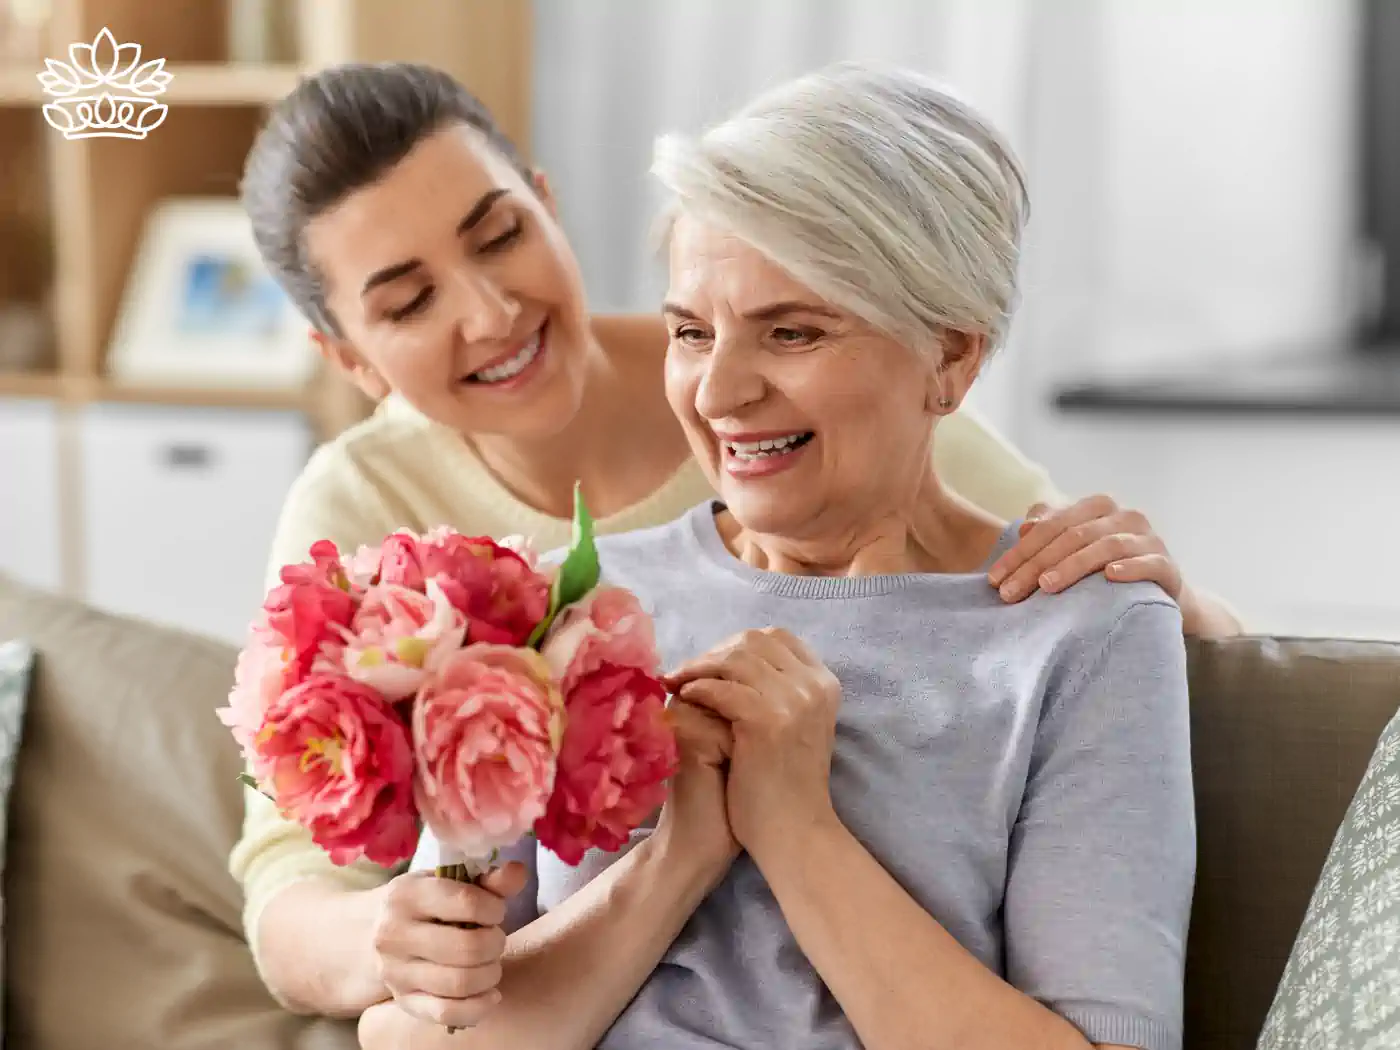 Image of an elderly woman receiving a pink flower bouquet from a younger woman, both smiling happily. Fabulous Flowers and Gifts - Luxury Flower Bouquets.